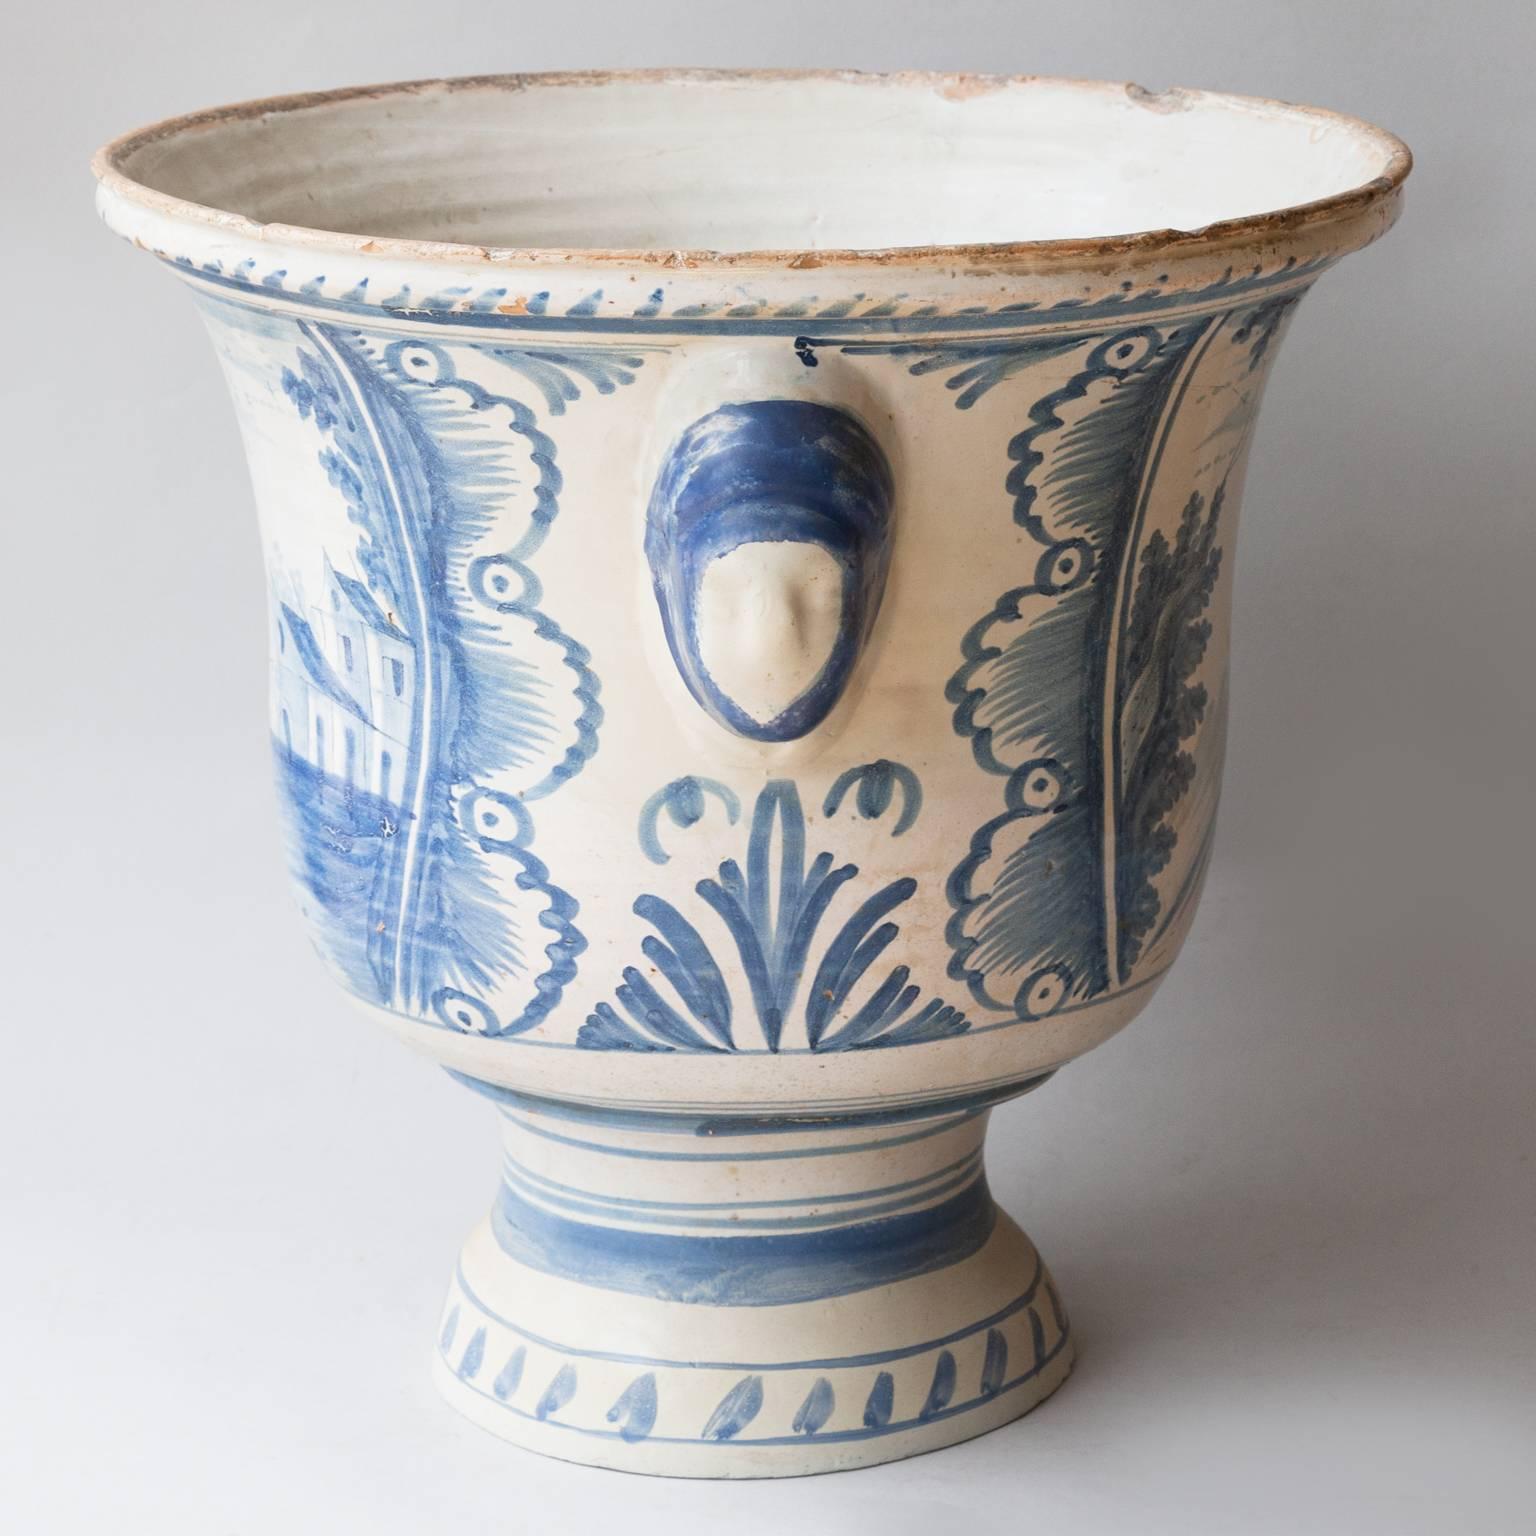 Blue and white glazed faïence large jardiniere decorated with pastoral scenes, raised on a plinth base with
handles in the shape of masks. 
Restoration to the base and handles. Rouen, France, circa 1800.
 